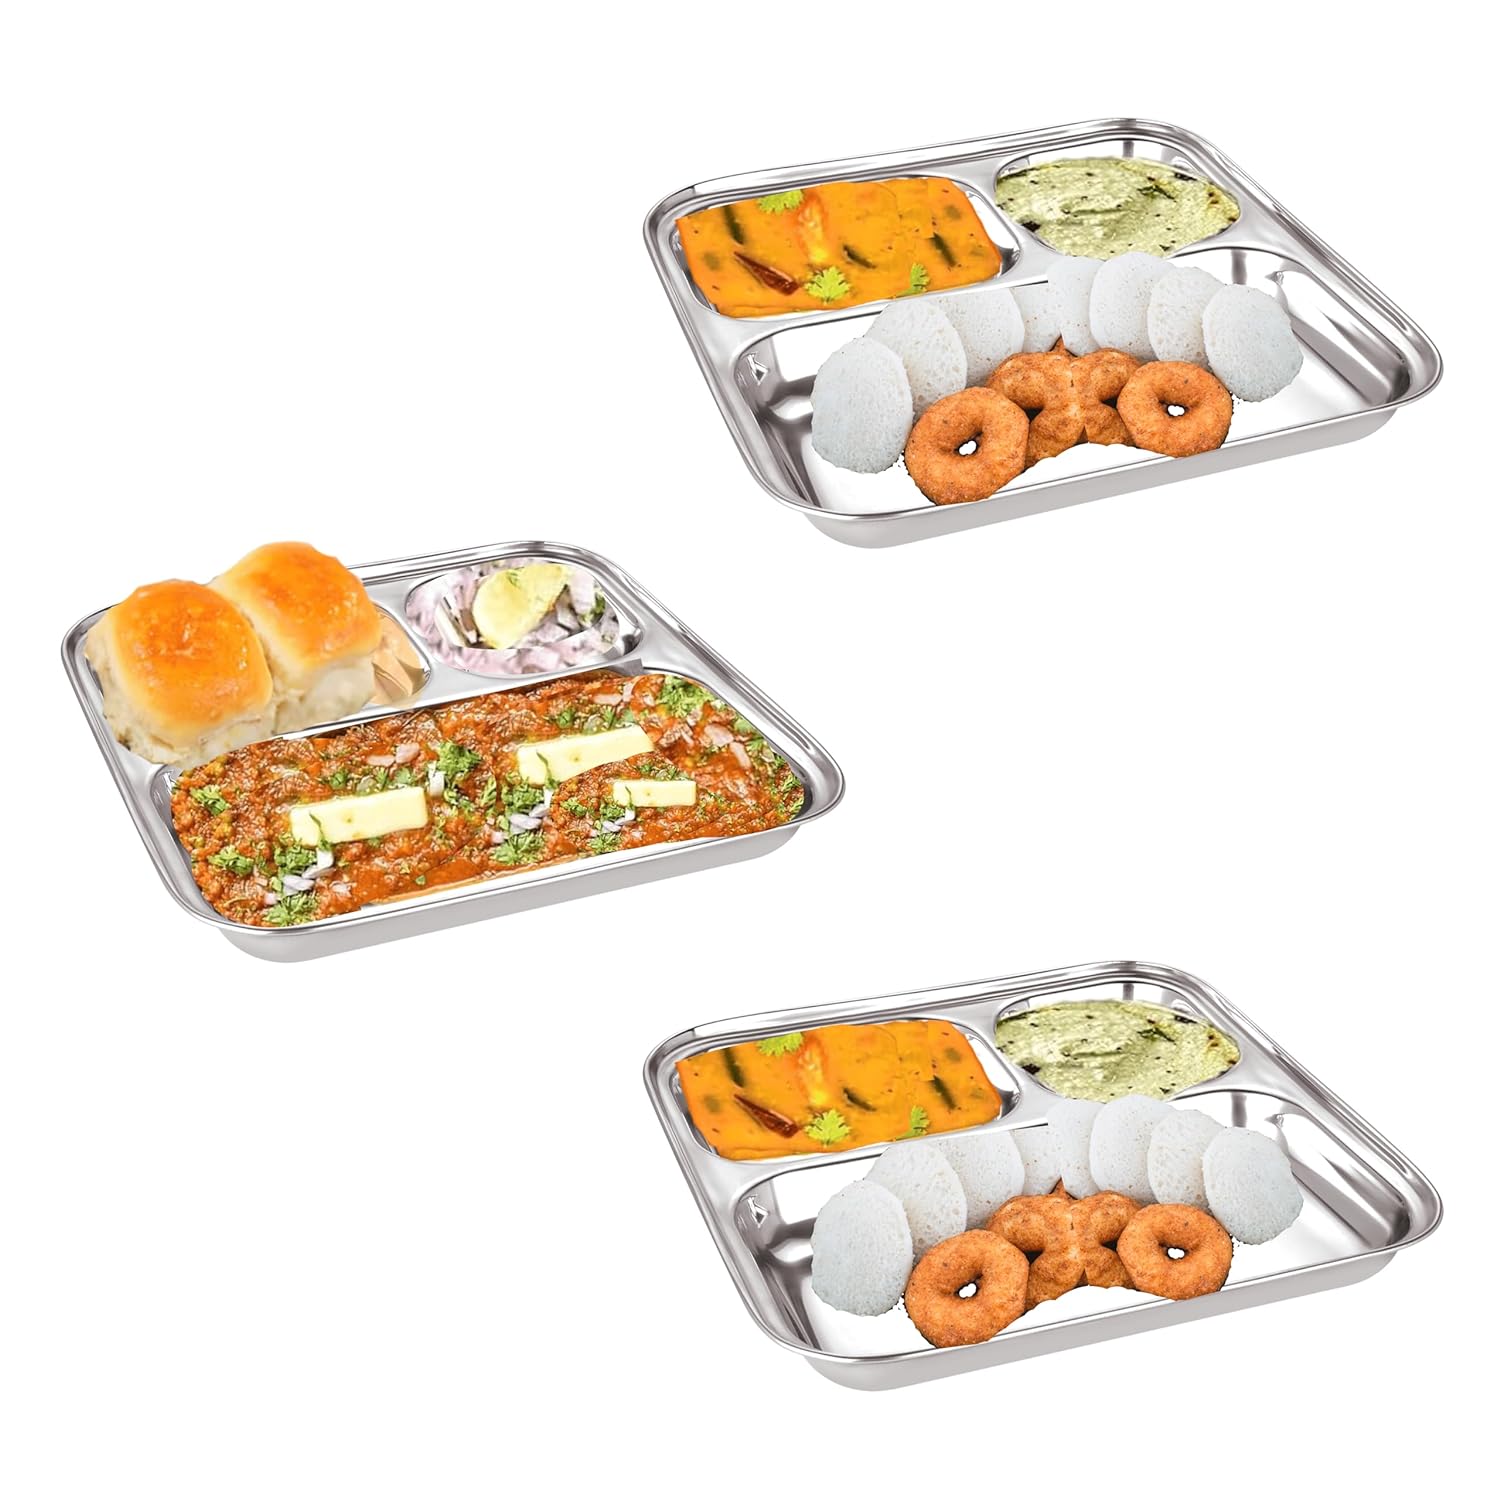 steel plates with compartments | steel plates set of 12 | stainless steel plates set of 6 | stainless steel plate | steel plates set of 4 | steel plates for kids | lunch plates stainless steel | steel plates set of 2 | stainless steel plates | steel plate set | steel plates set of 6 dinner plate | steel thali with compartments